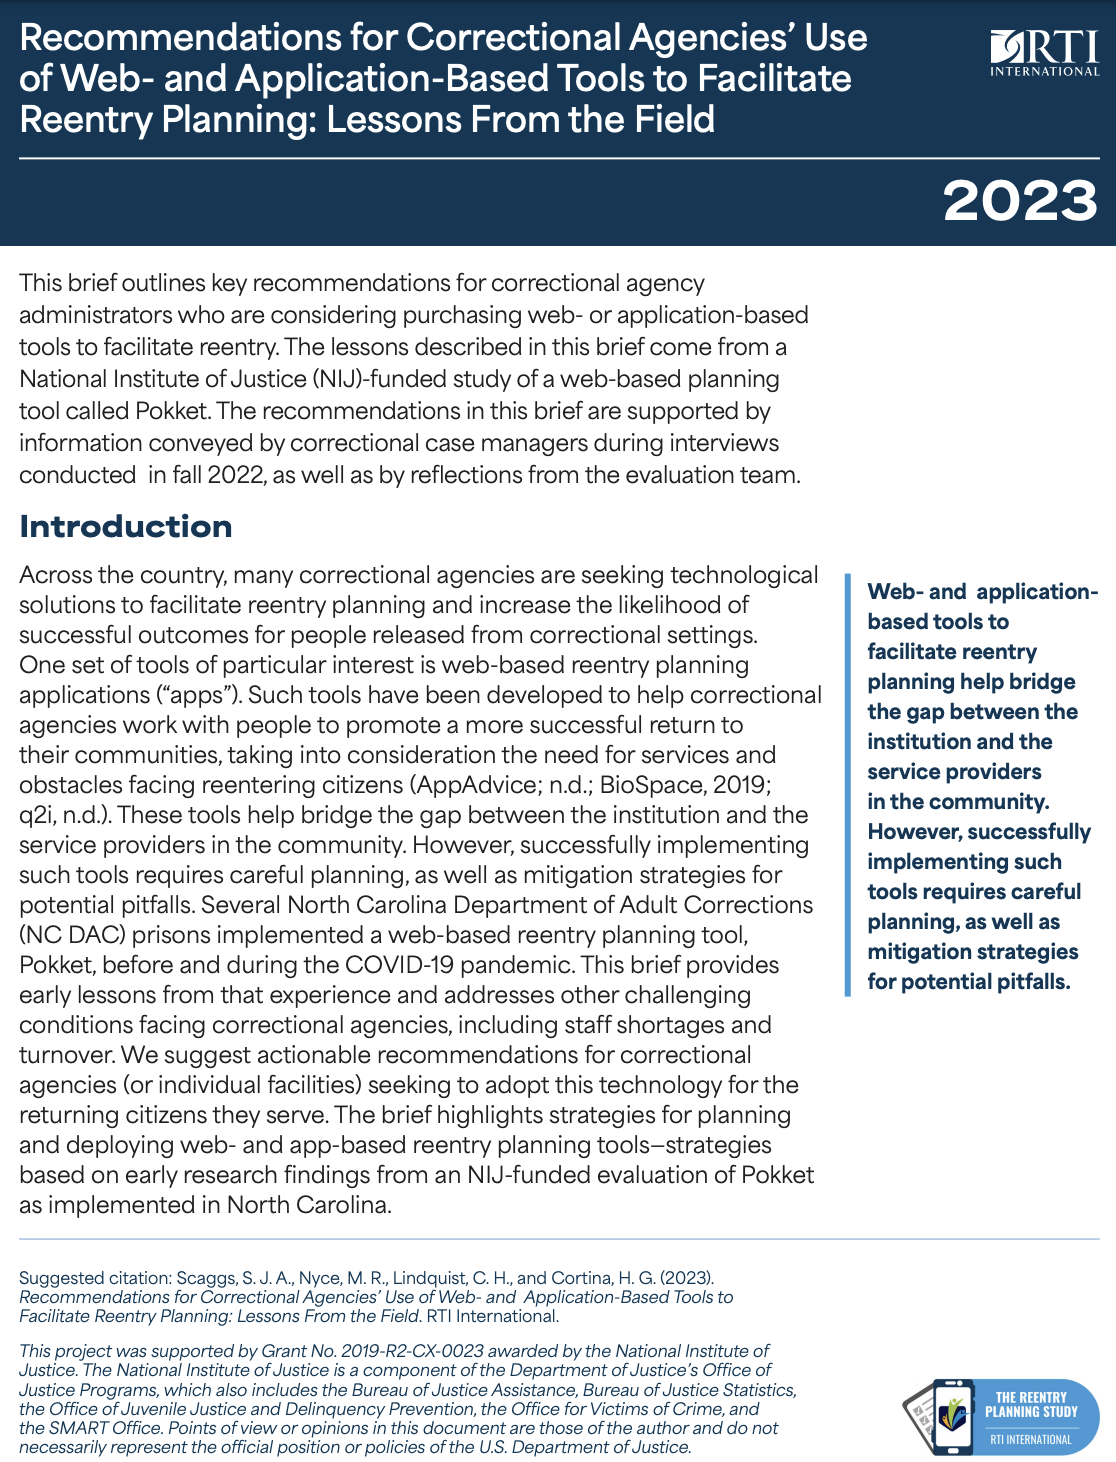 Recommendations for Correctional Agencies’ Use of Web- and Application-Based Tools to Facilitate Reentry Planning: Lessons From the Field